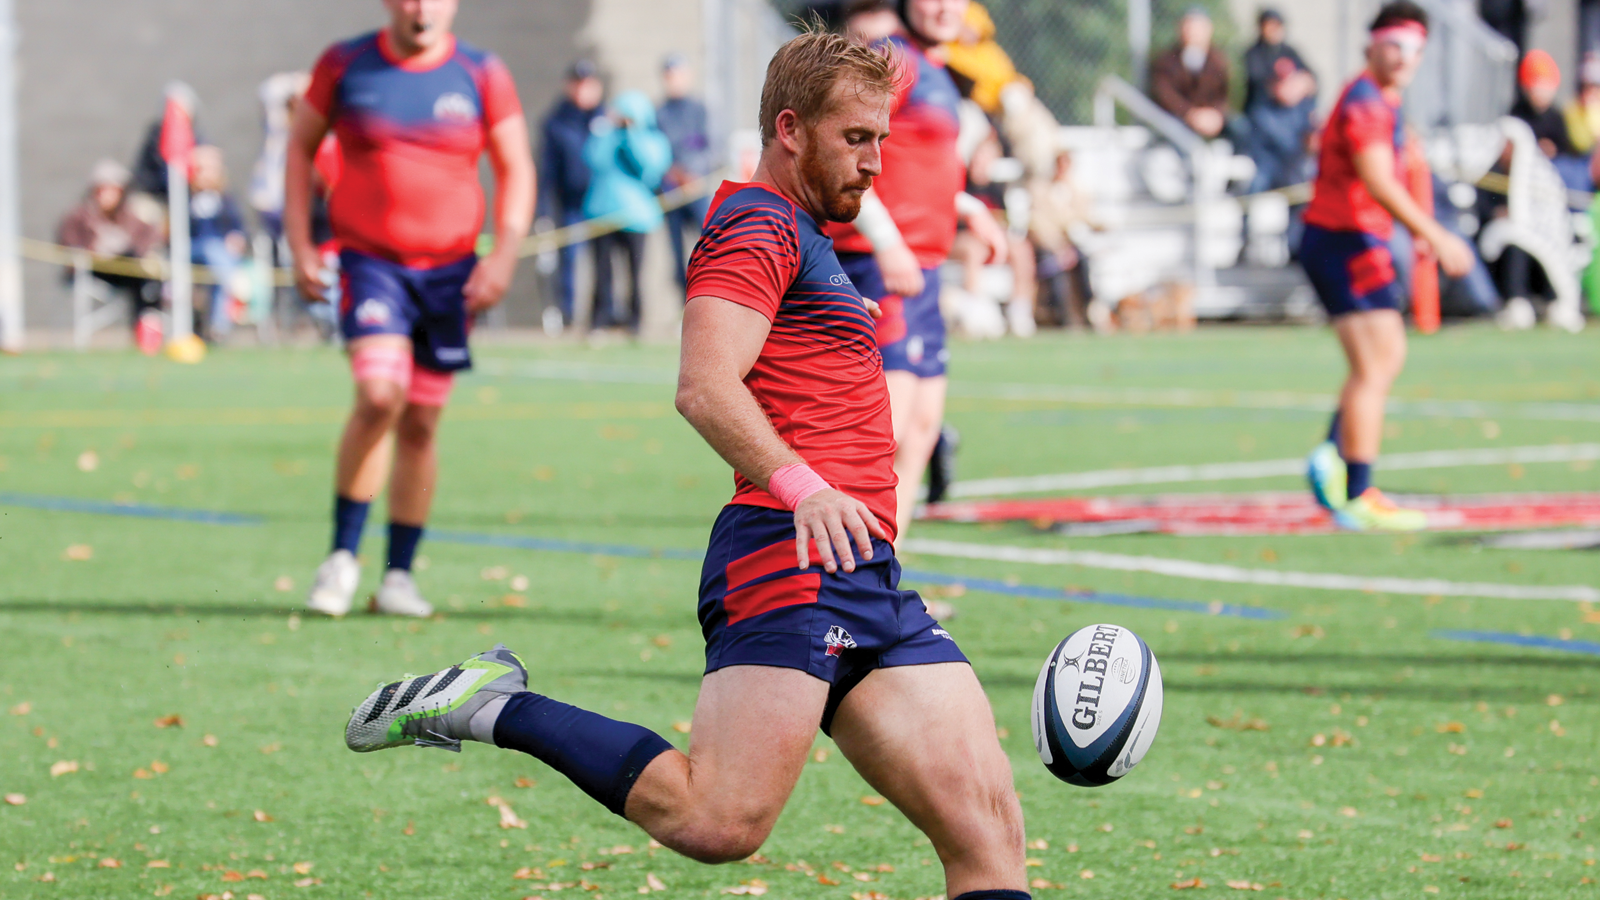 Brock men's rugby player Steven Commerford about to kick the ball during a game